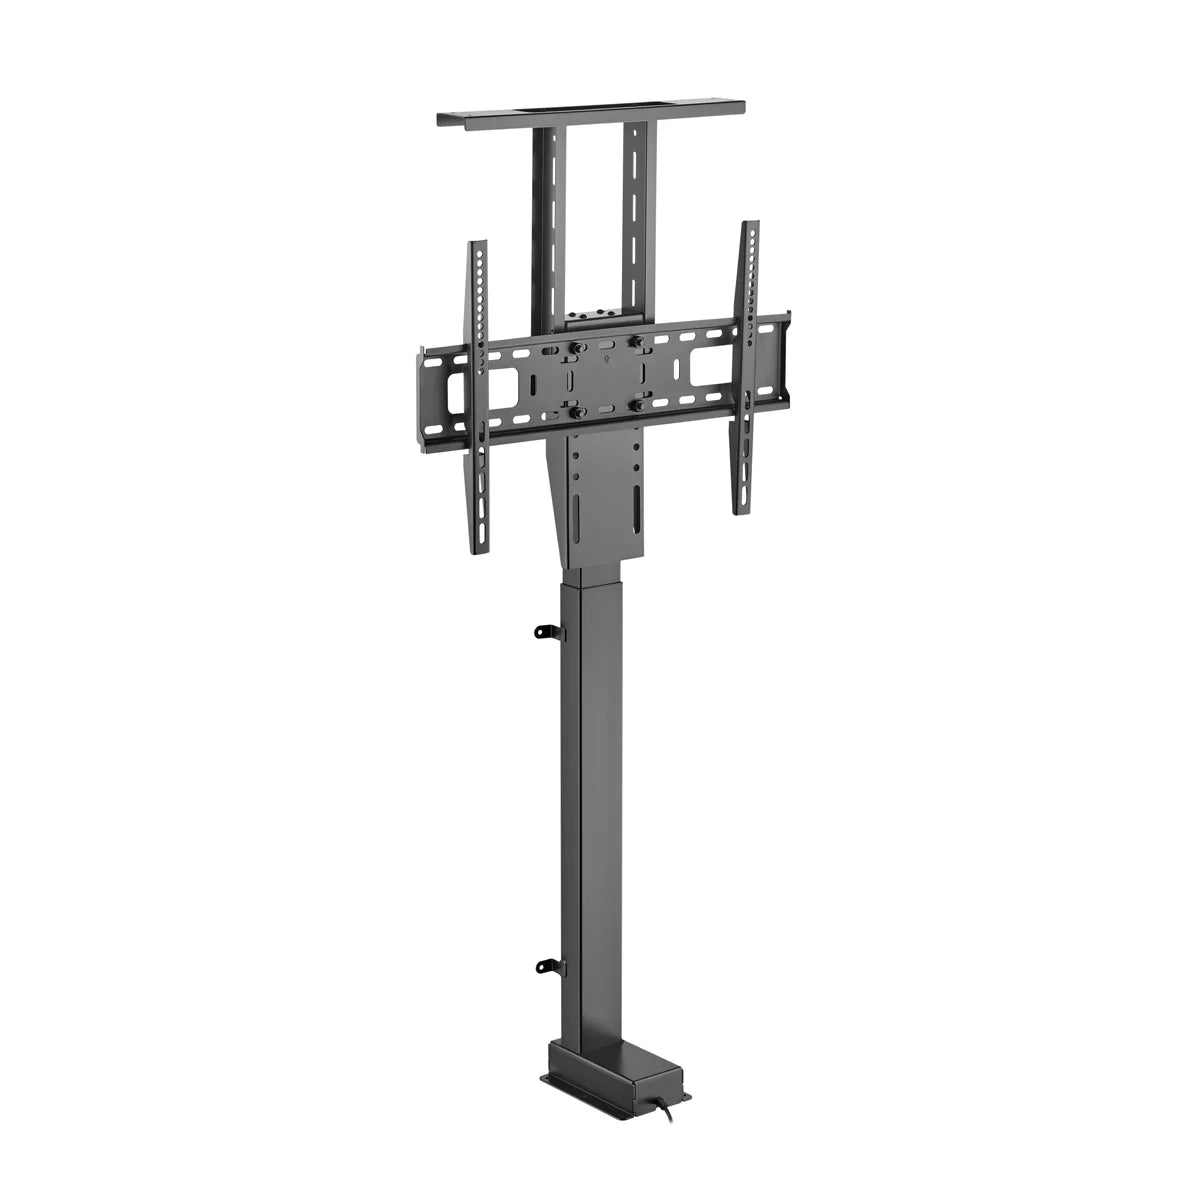 Skilltech -SH 46MX -Smart Large Motorized Tv Lift Stand With Voice & App Control